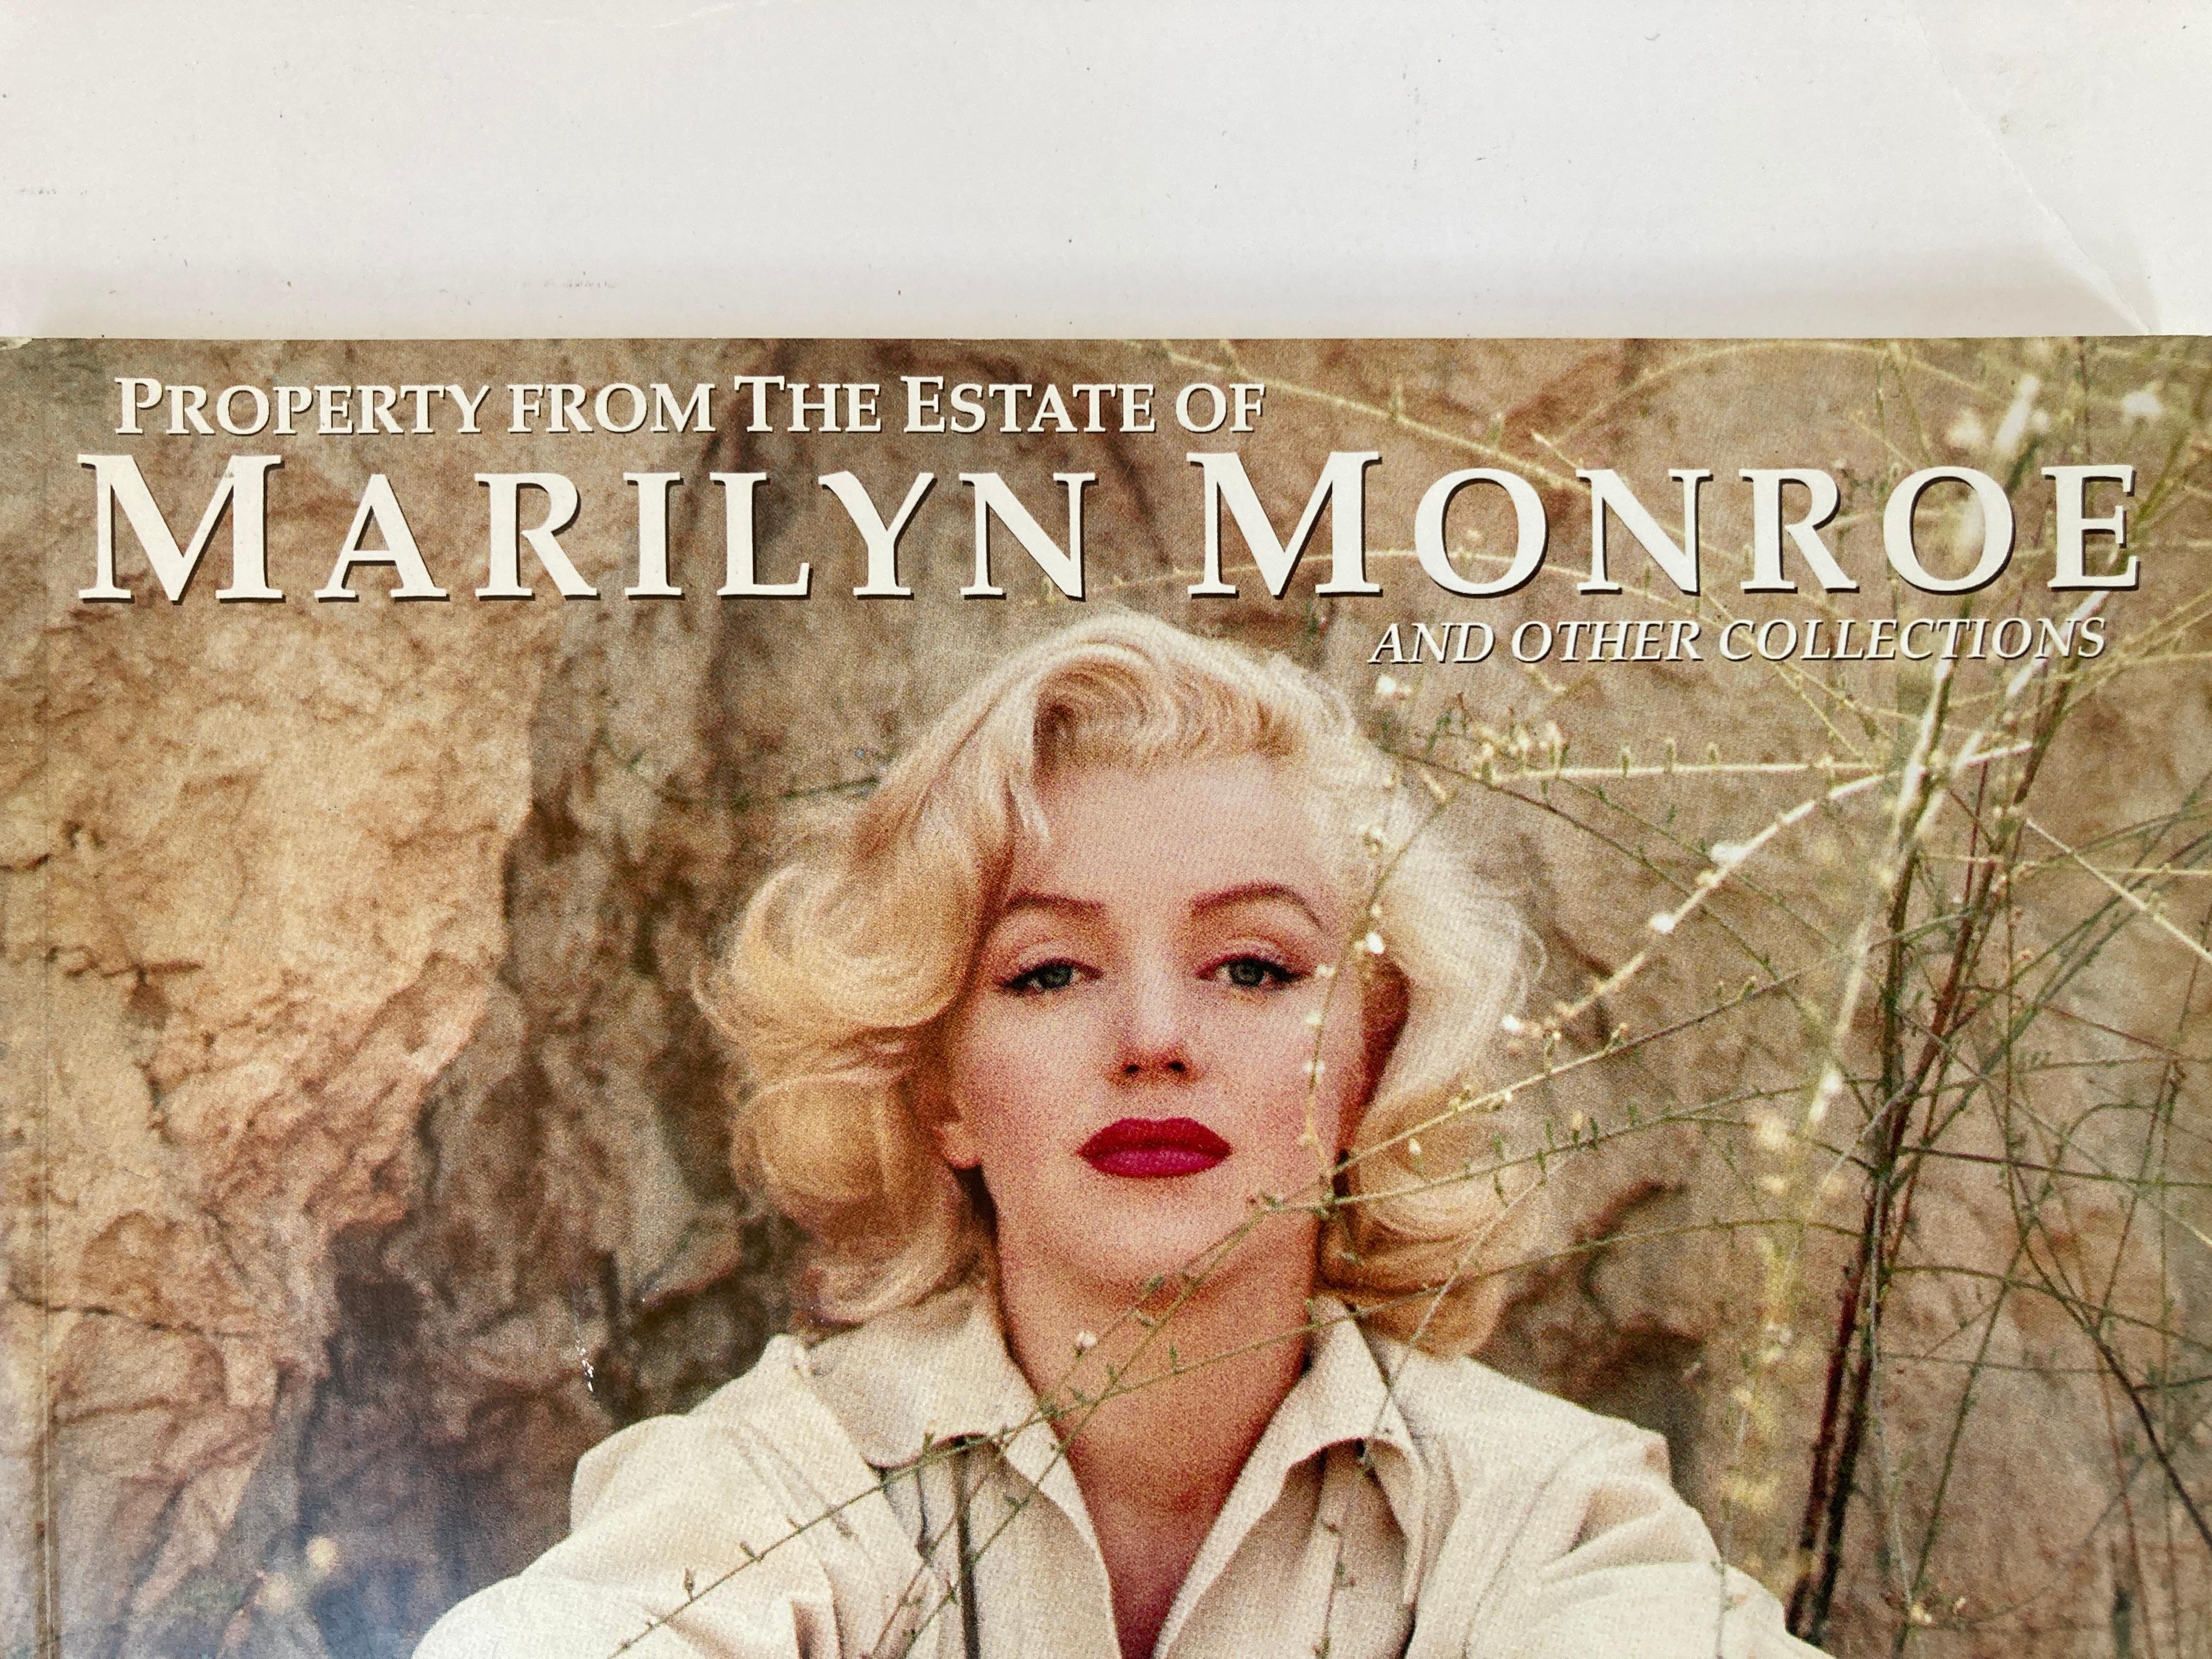 Marilyn Monroe auction catalogue by Darren Julien. June 4th 2005.
President and CEO Julien's Auctions.
It is a privilege for julien's to bring this collection of personal and professional property belonging to Marilyn Monroe to auction.
With over